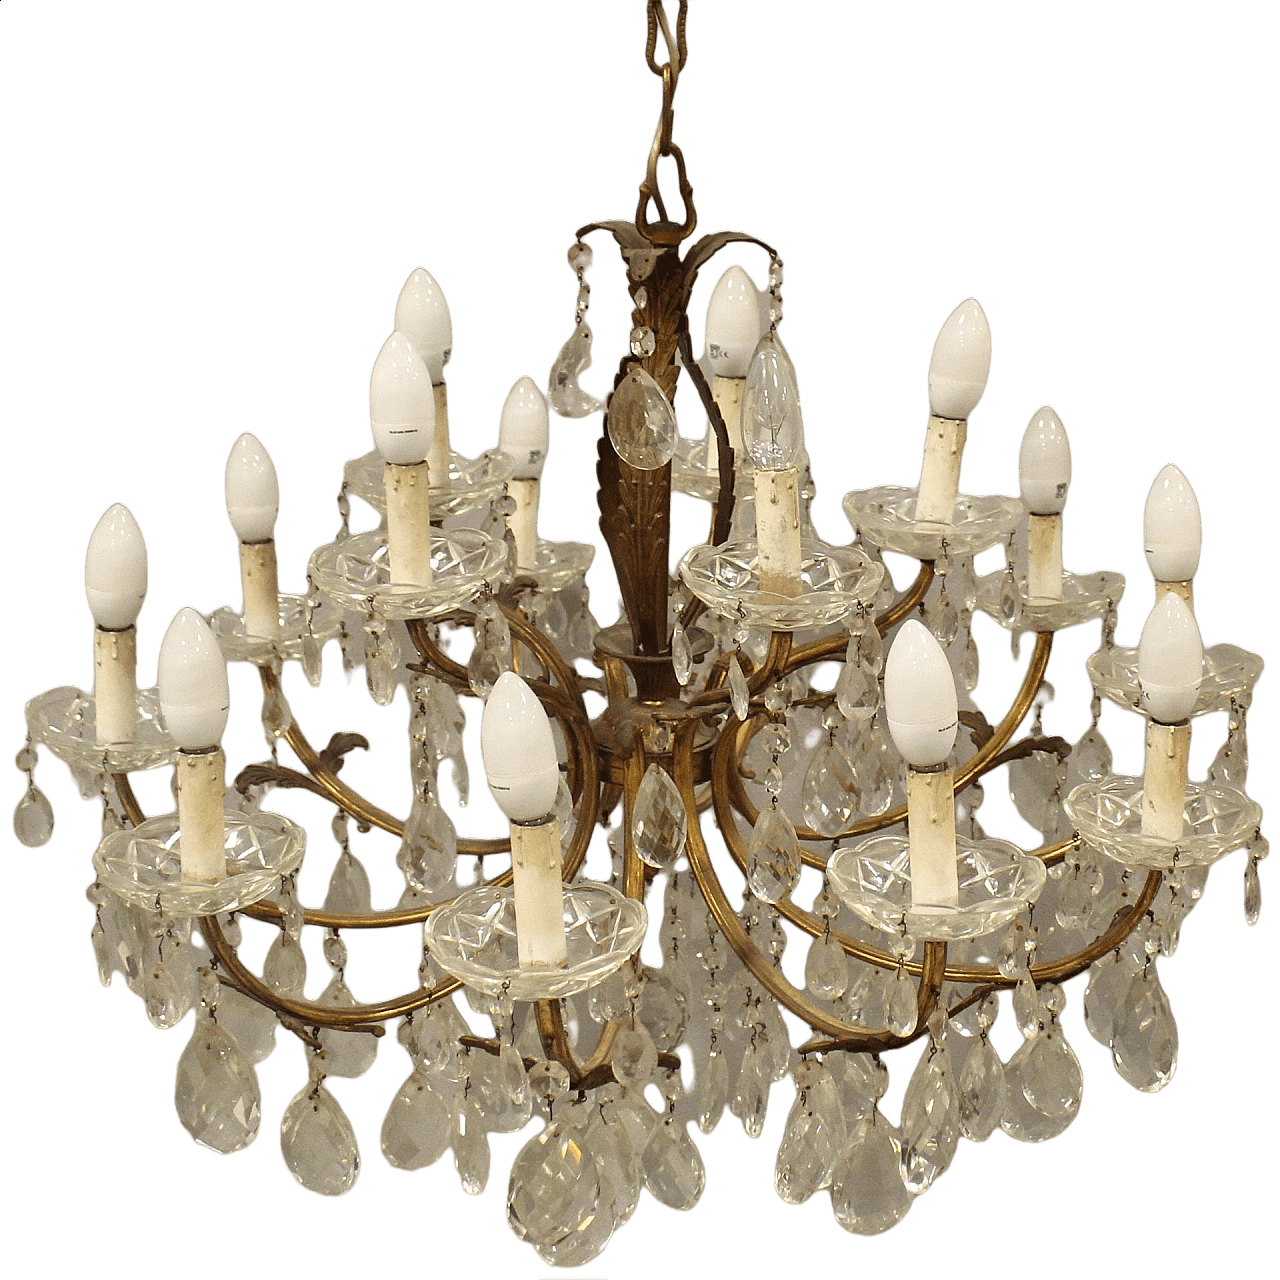 15-light chandelier with crystal drops, mid-19th century 4